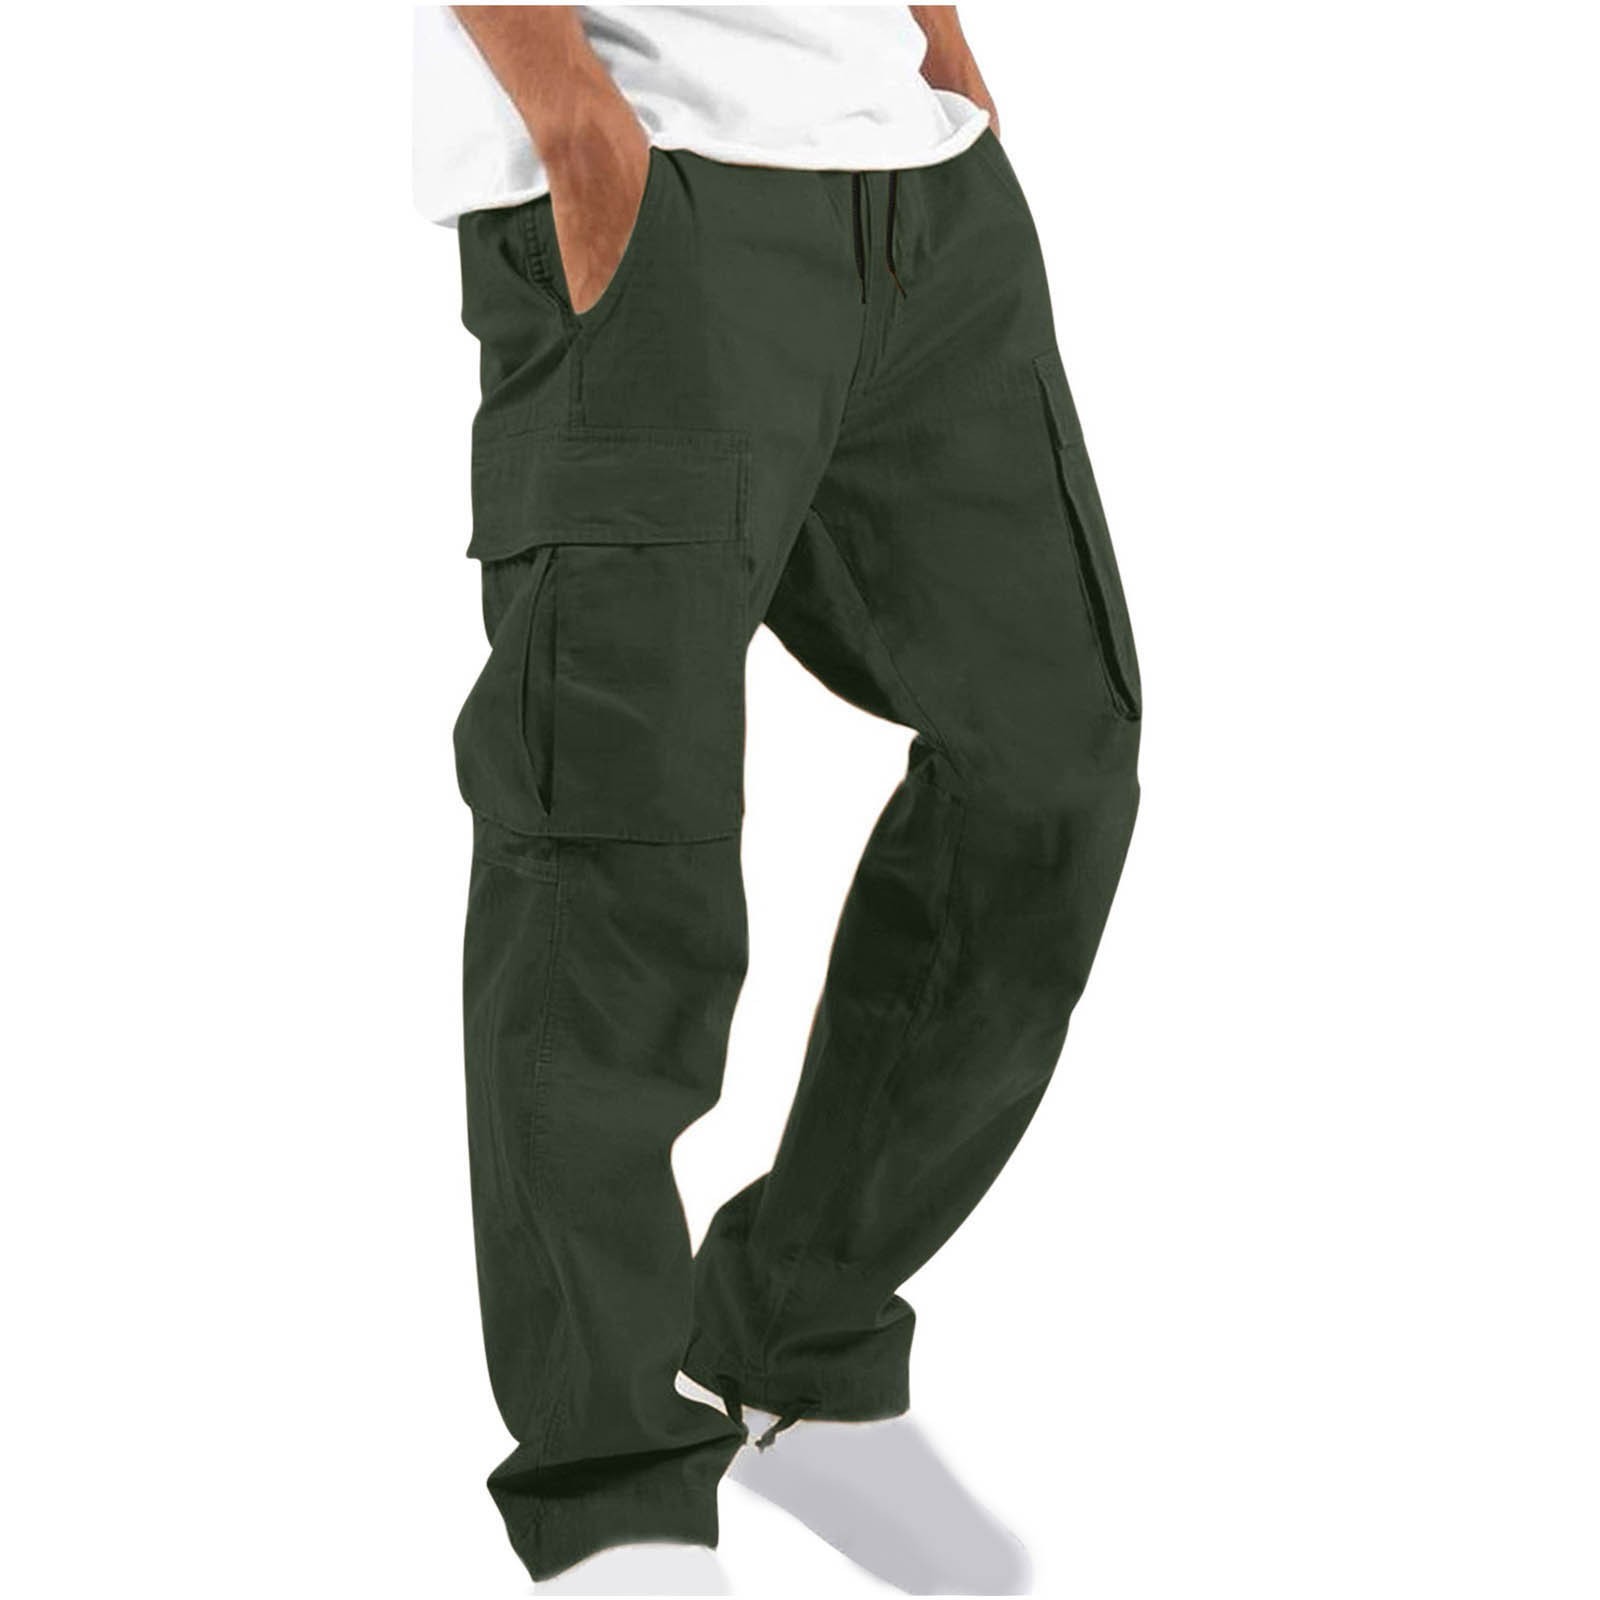 Clearance-sale Cargo Pants for Men Men Solid Casual Multiple Pockets ...